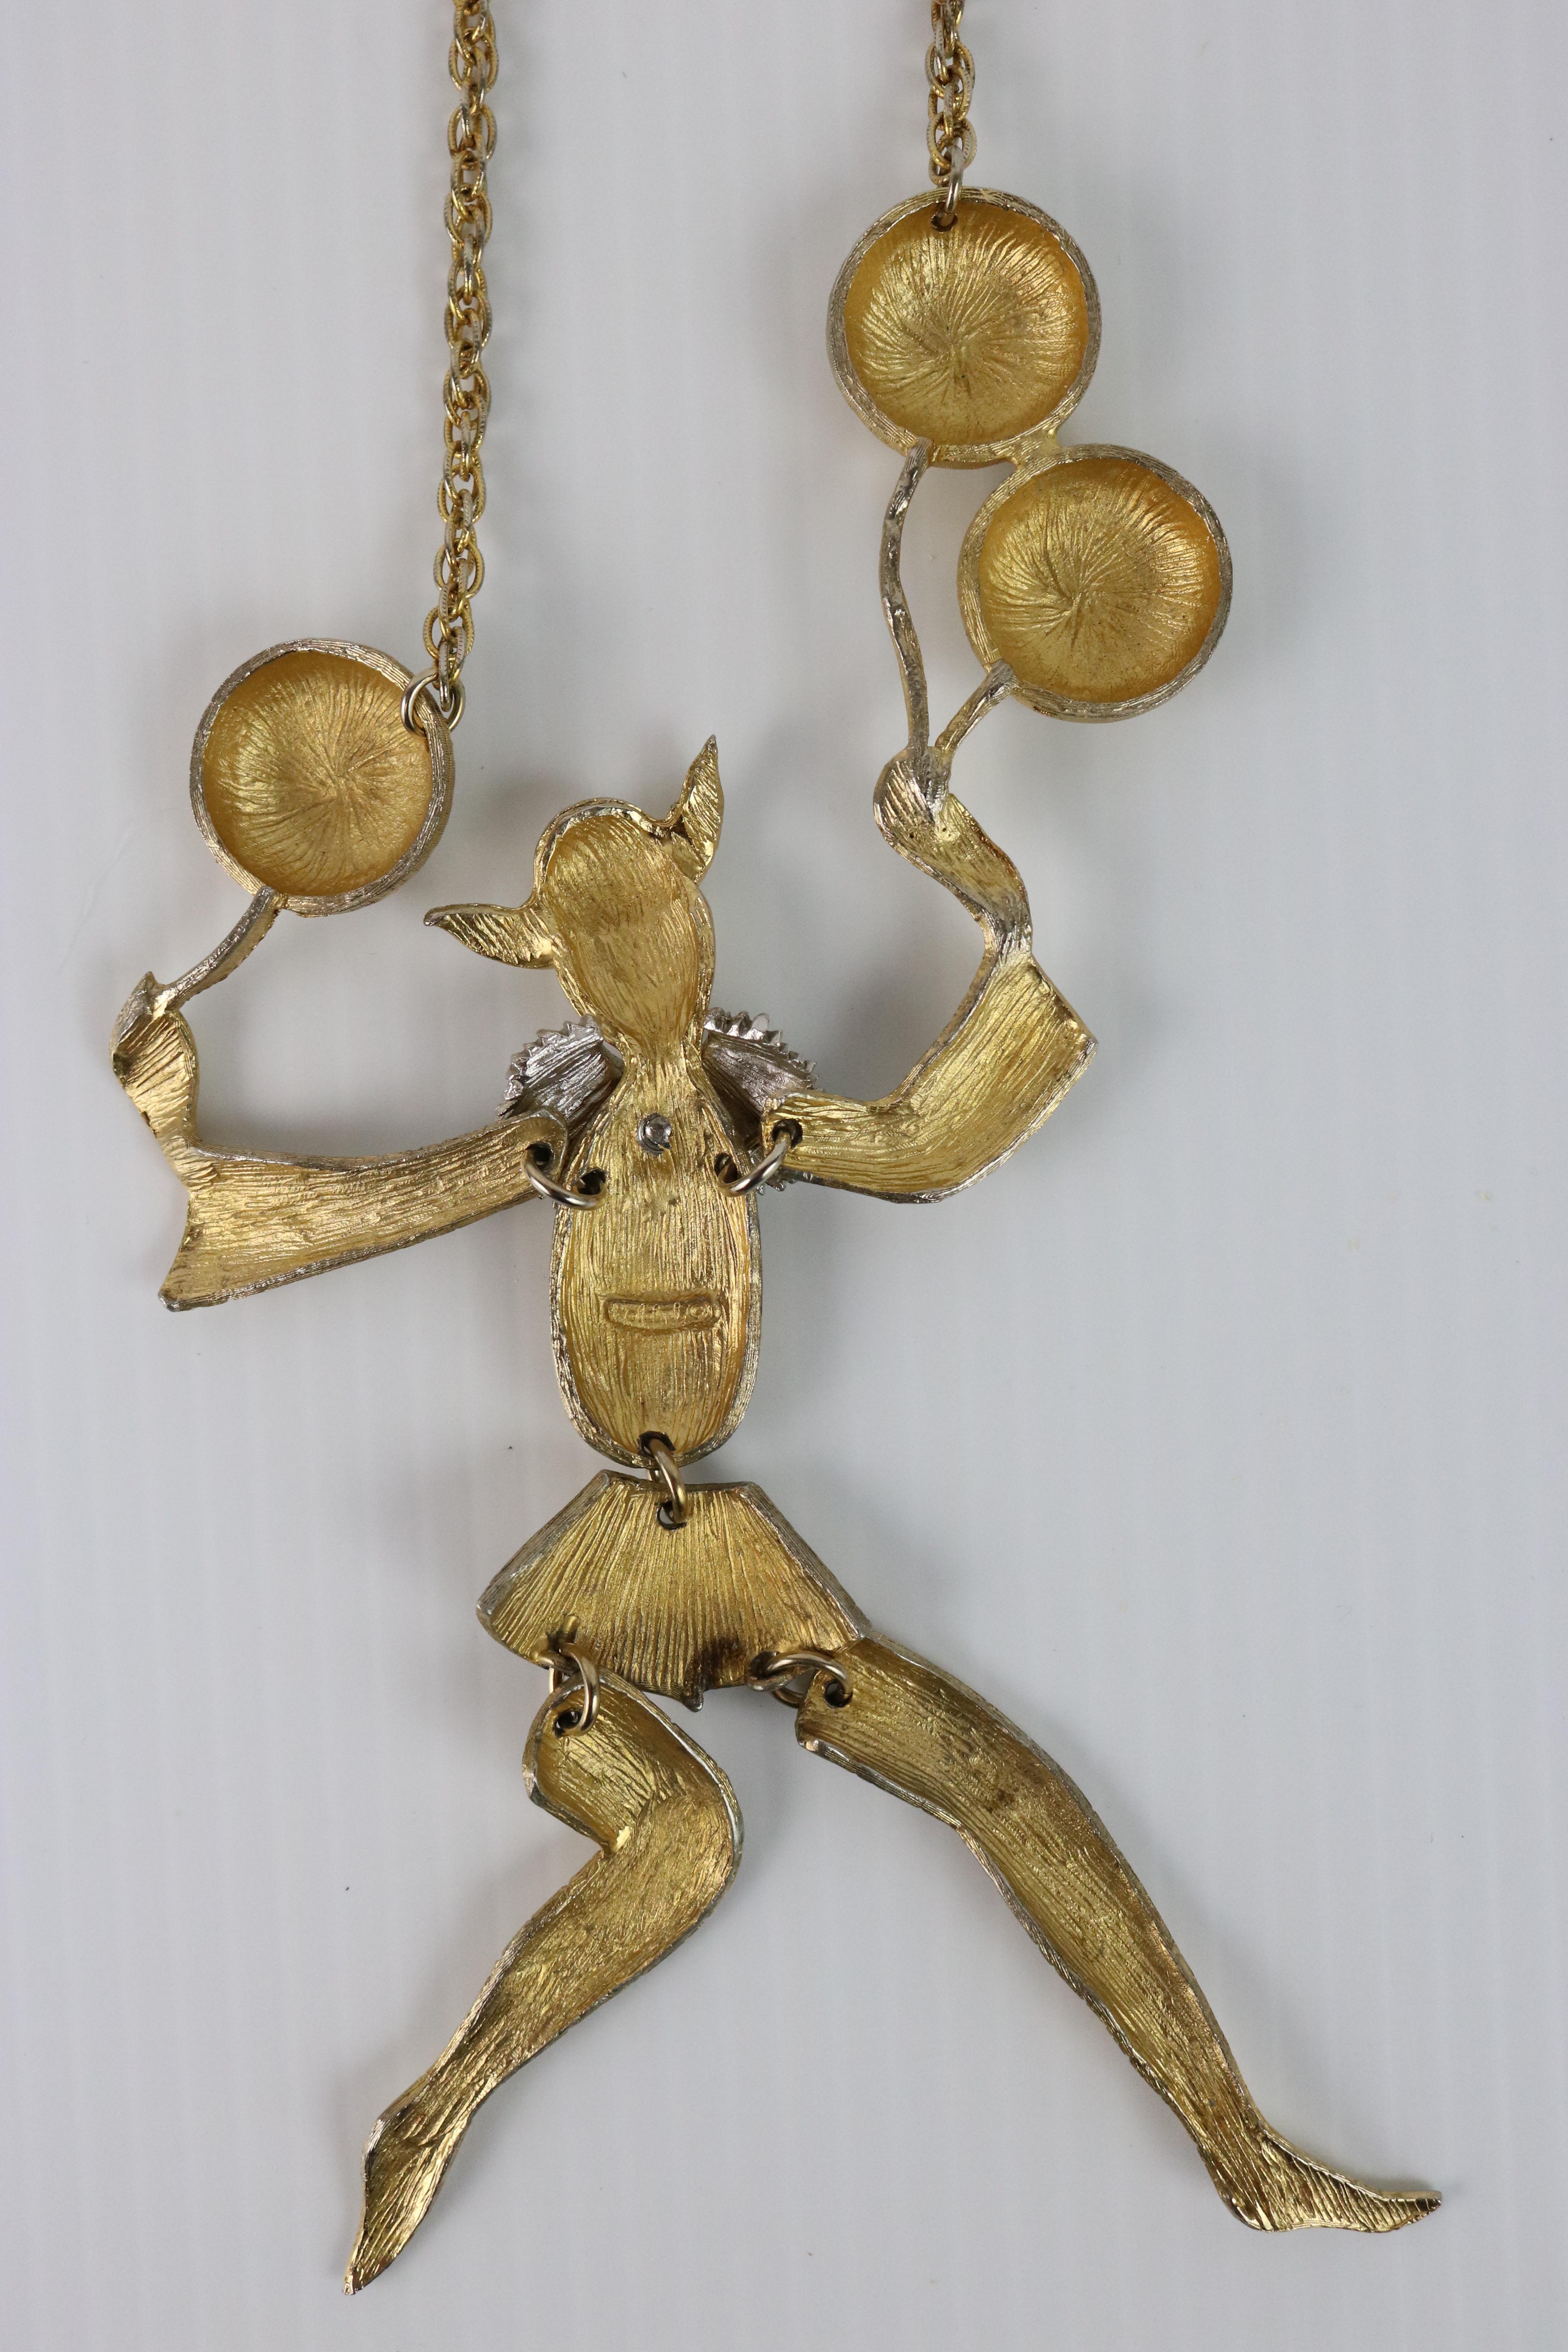 Vintage Polcini Articulated Harlequin Dancer Necklace- circa 1960-Hallmark In Good Condition For Sale In West Palm Beach, FL